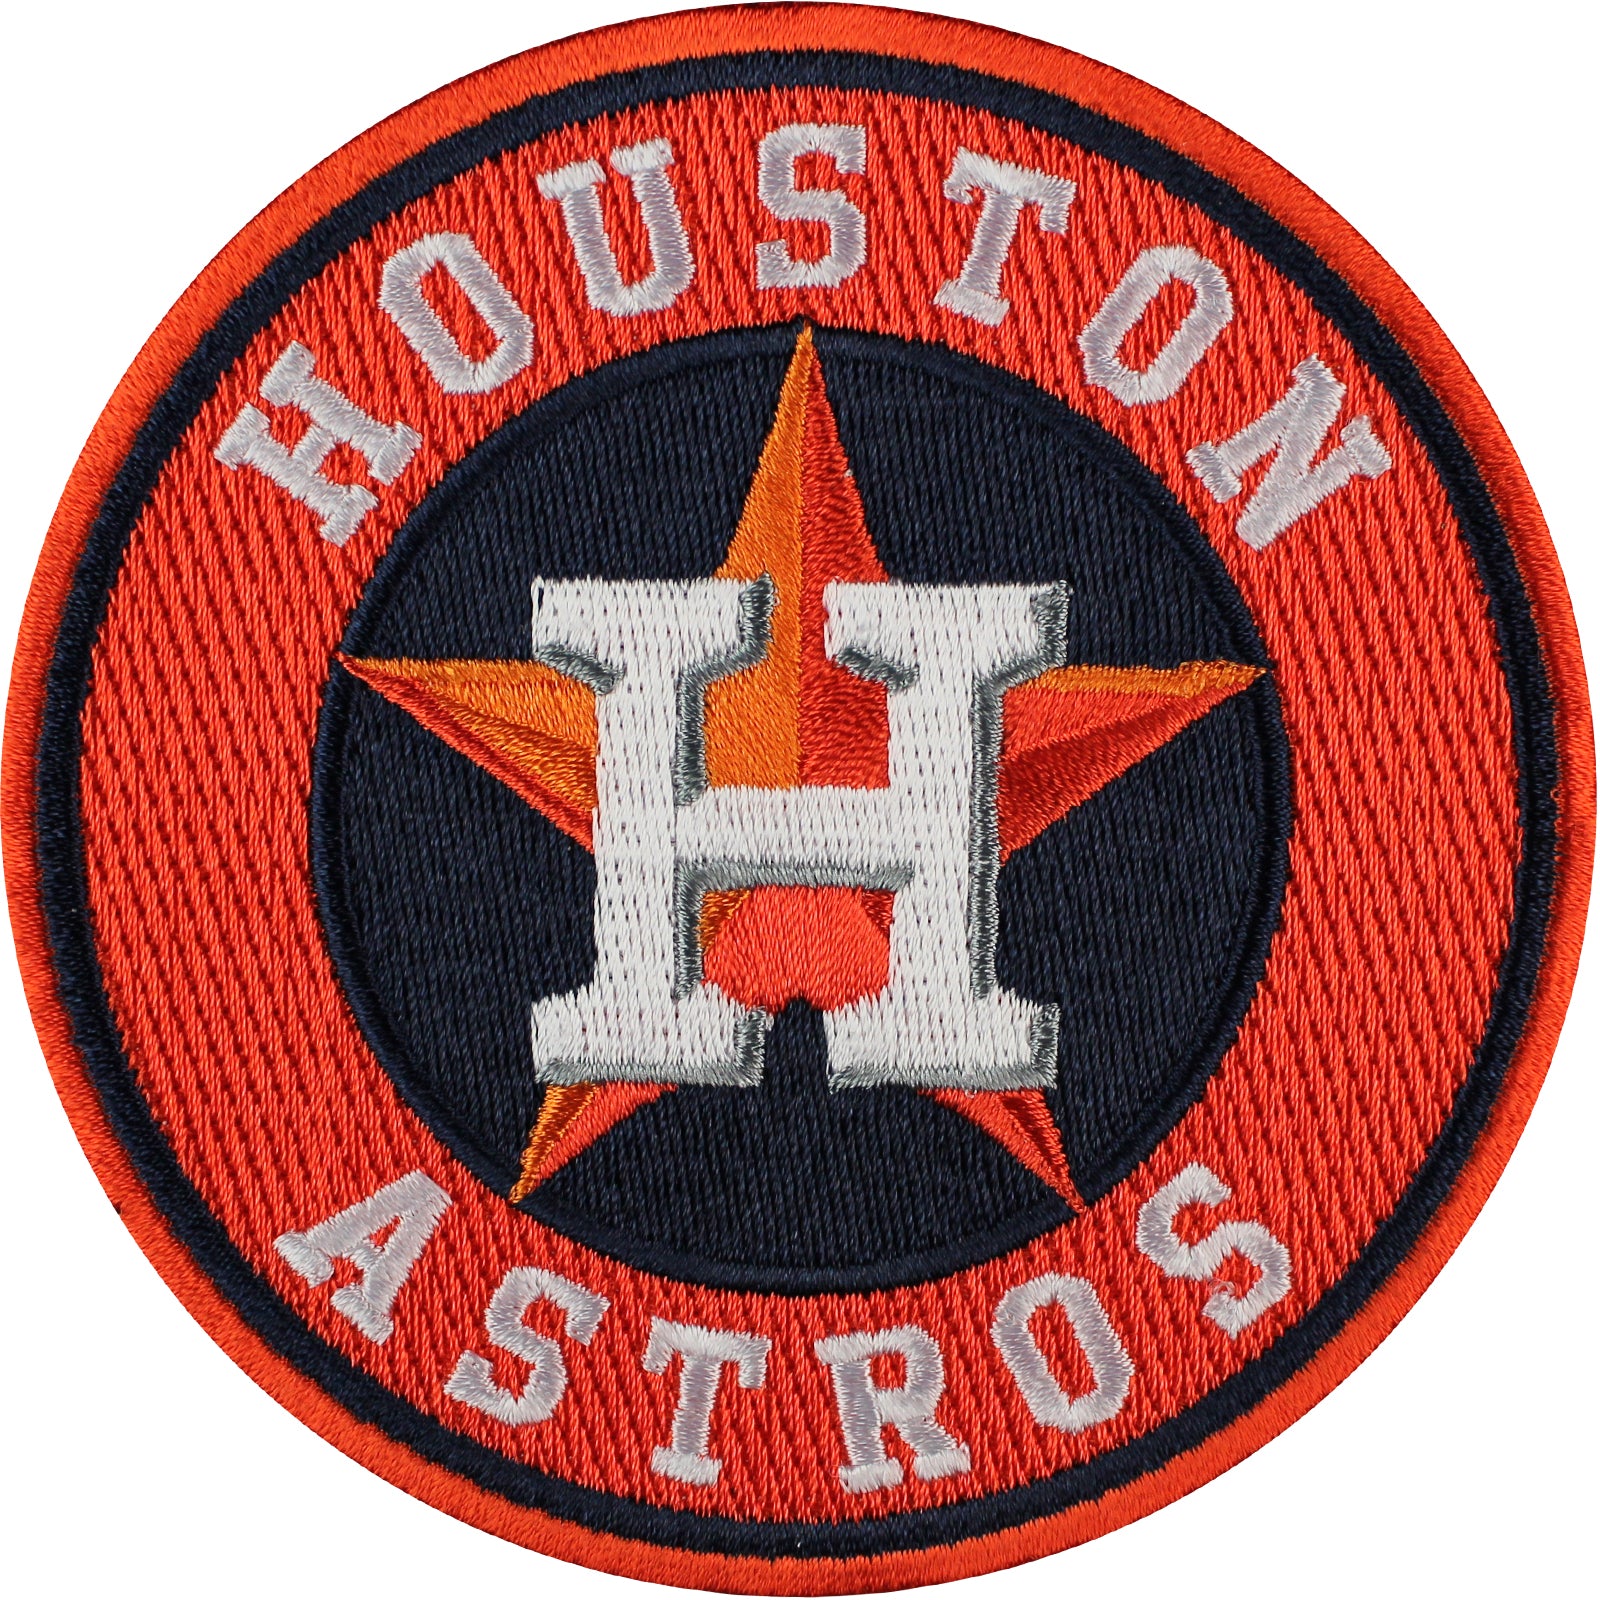 HOUSTON ASTROS Space City LOGO Patch Texas Baseball jersey patch